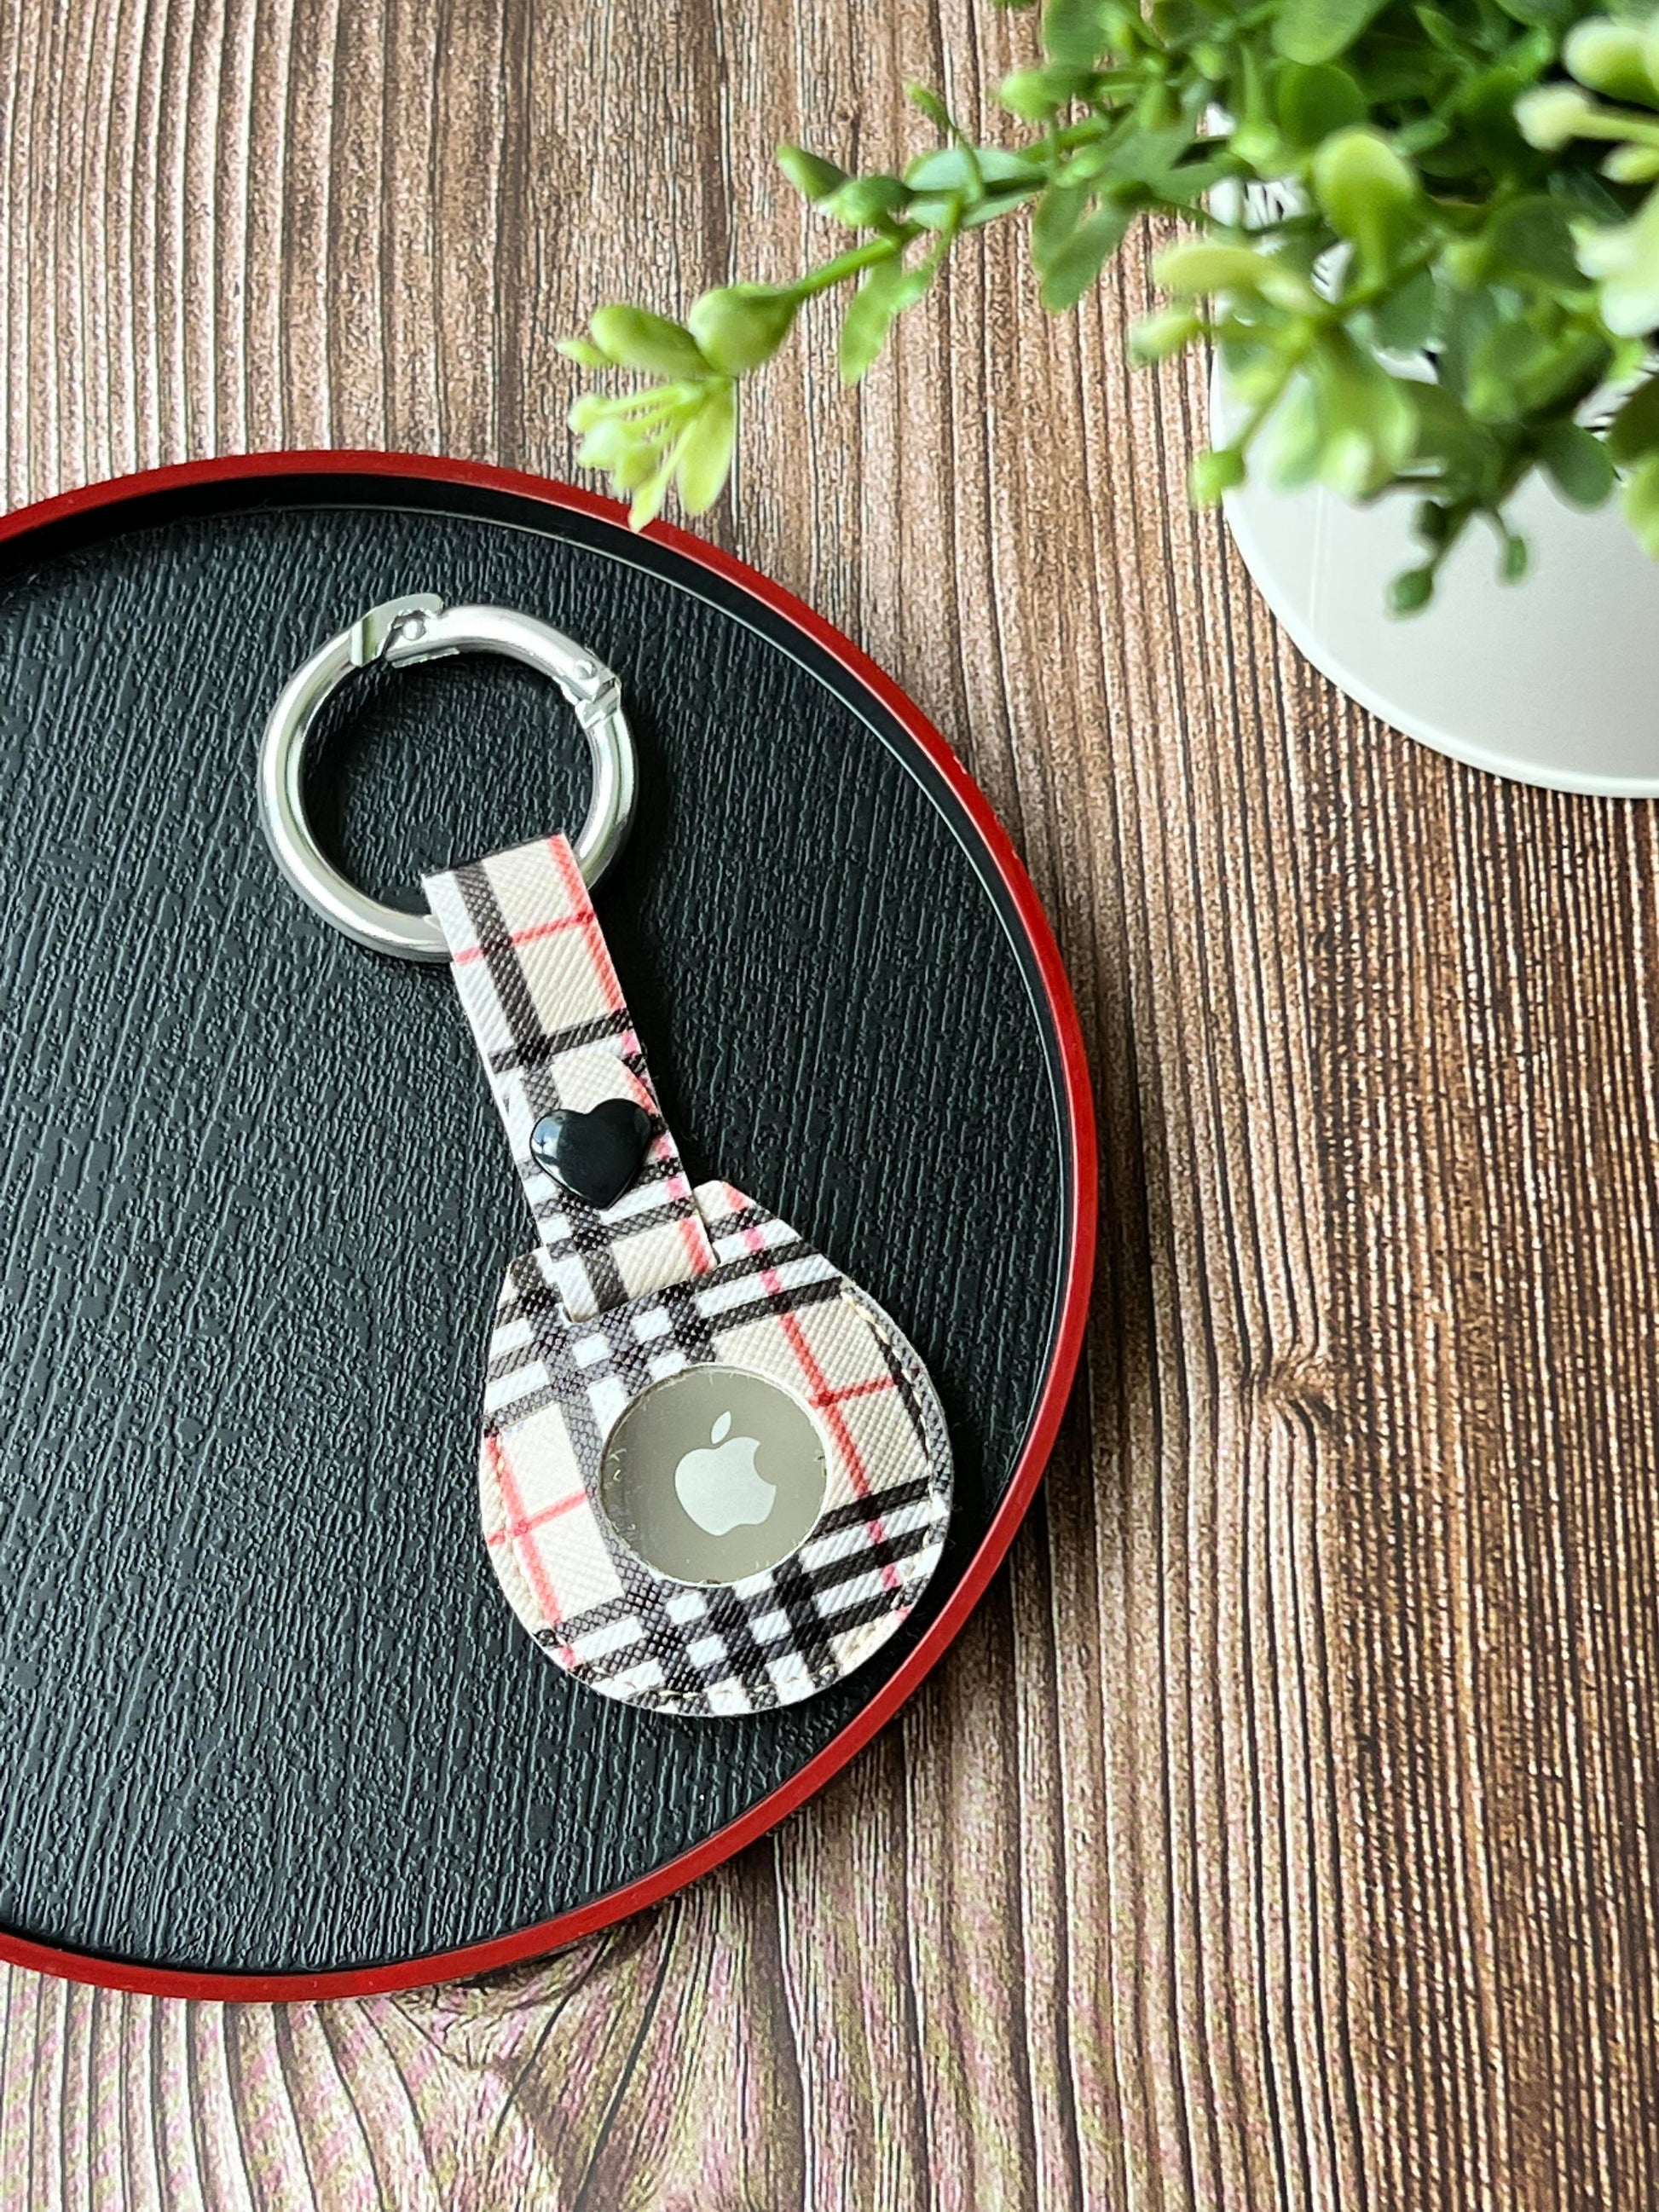 Geometric Goods AirTag Keychain with Snap Hook and Keyring Black